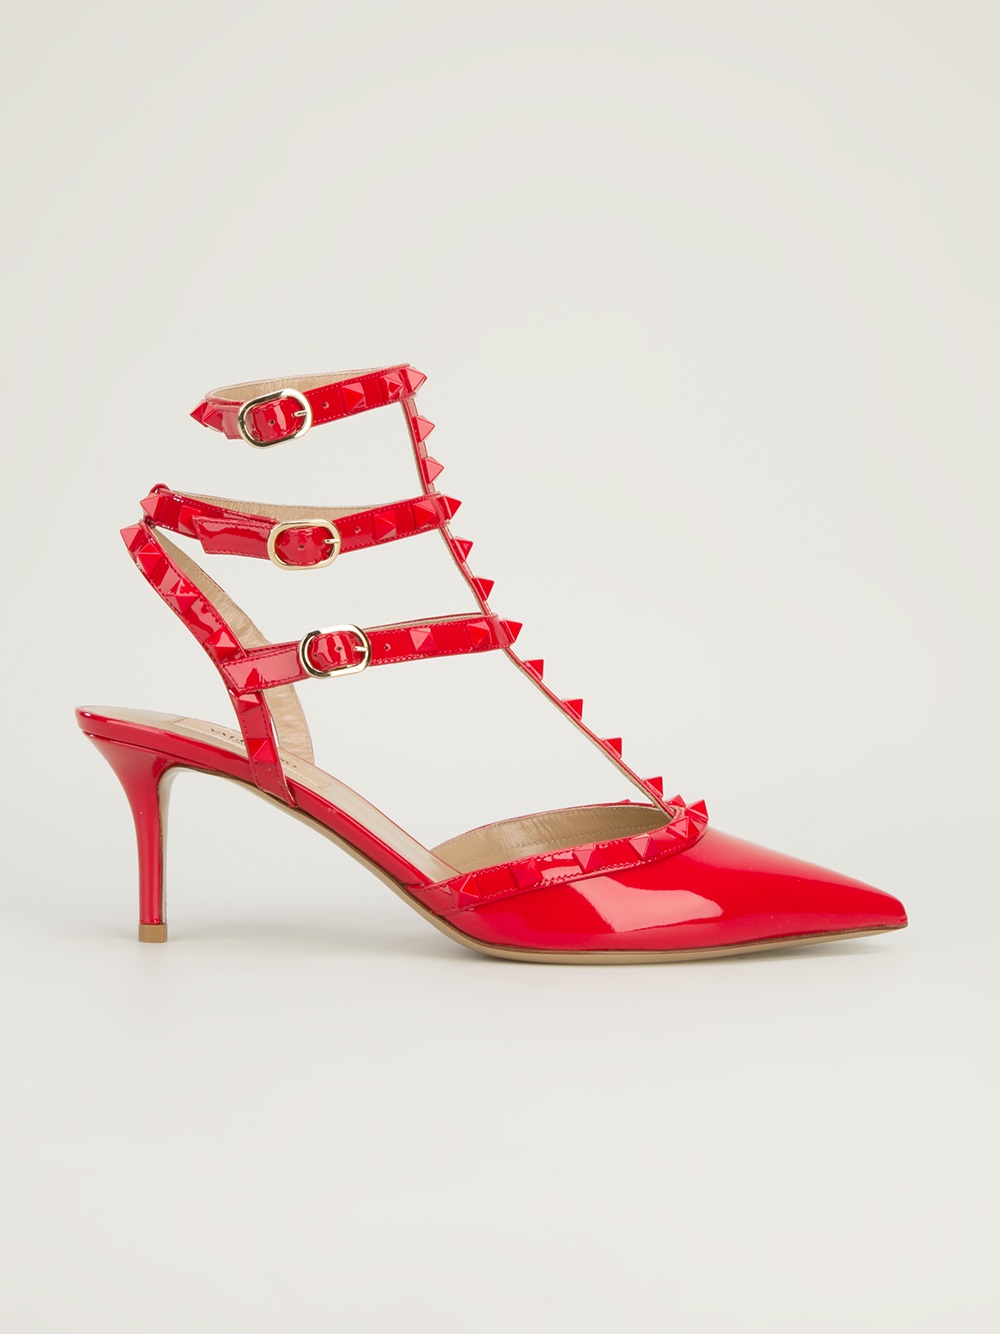 Lyst - Valentino Studded Mid Heel Sandal in Red